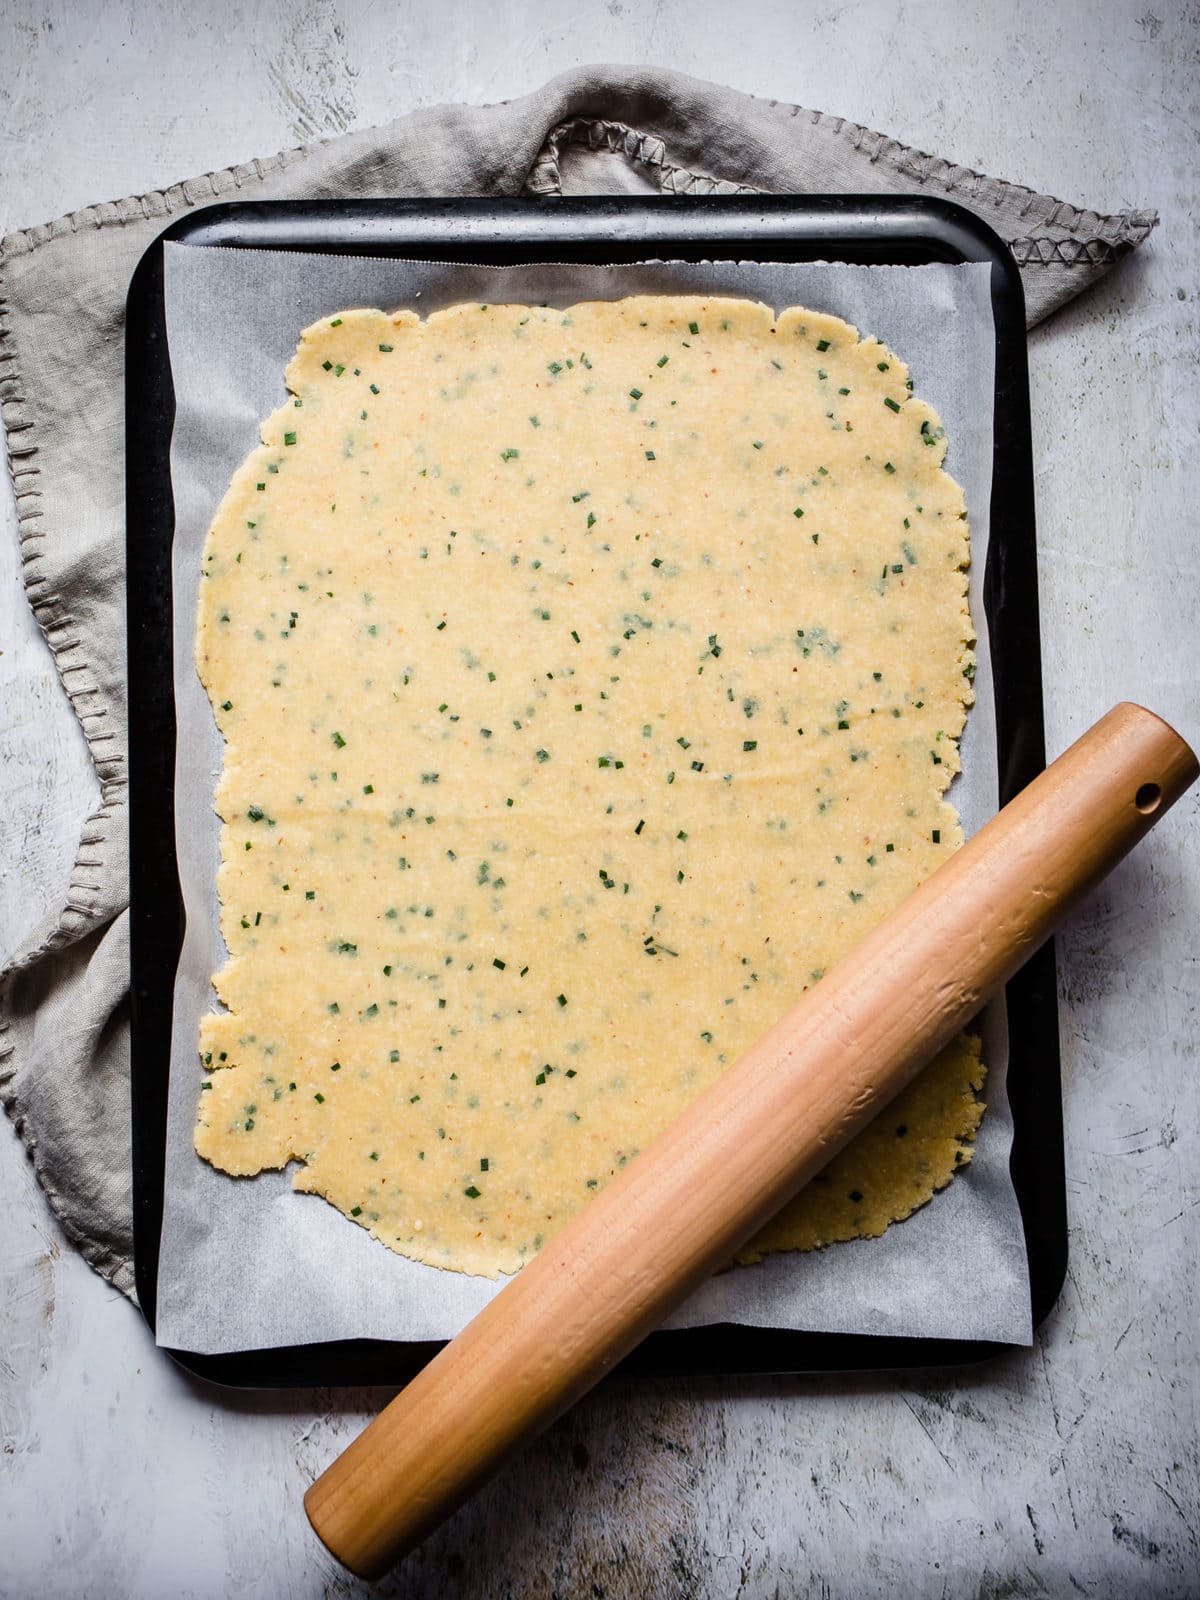 Parmesan Chive and Garlic Keto Crackers | Peace Love and Low Carb